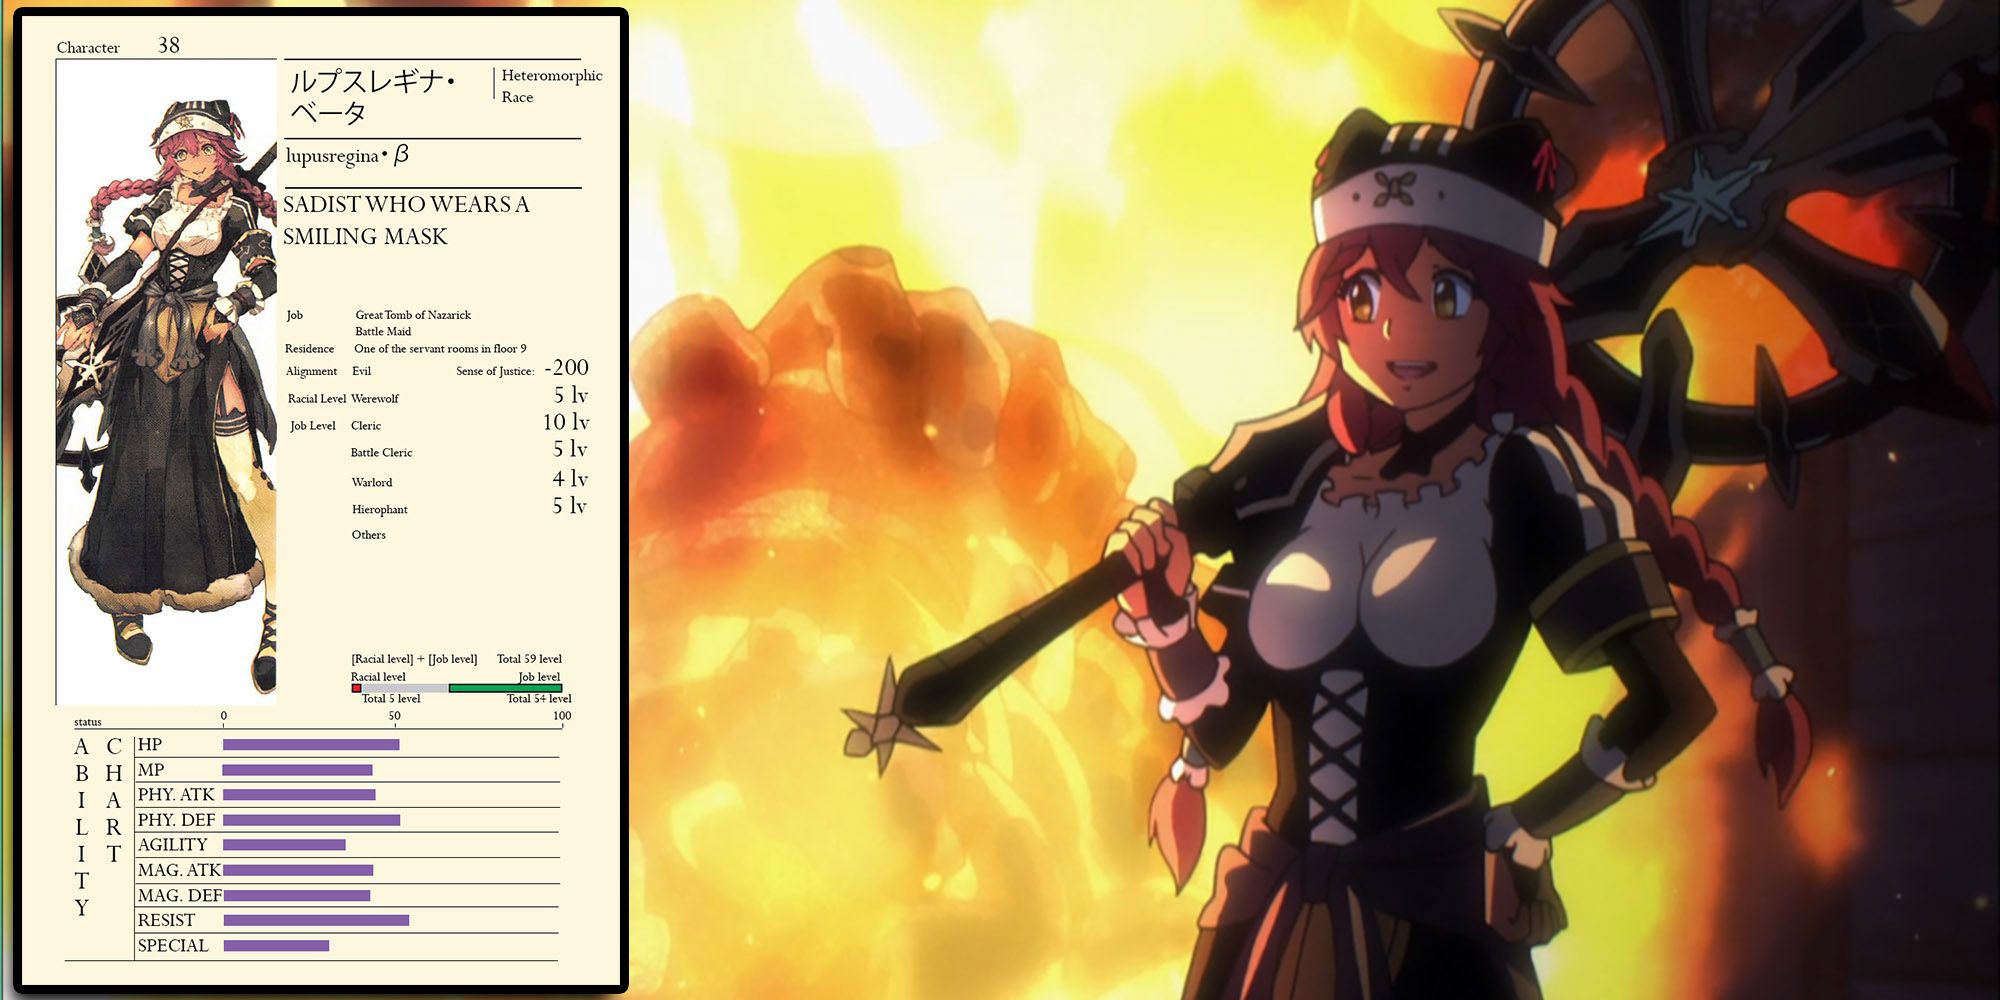 Overlord - Lupusregina Smiling After Decimating A Troll With Flames With Official Character Sheet Overlaid On Top